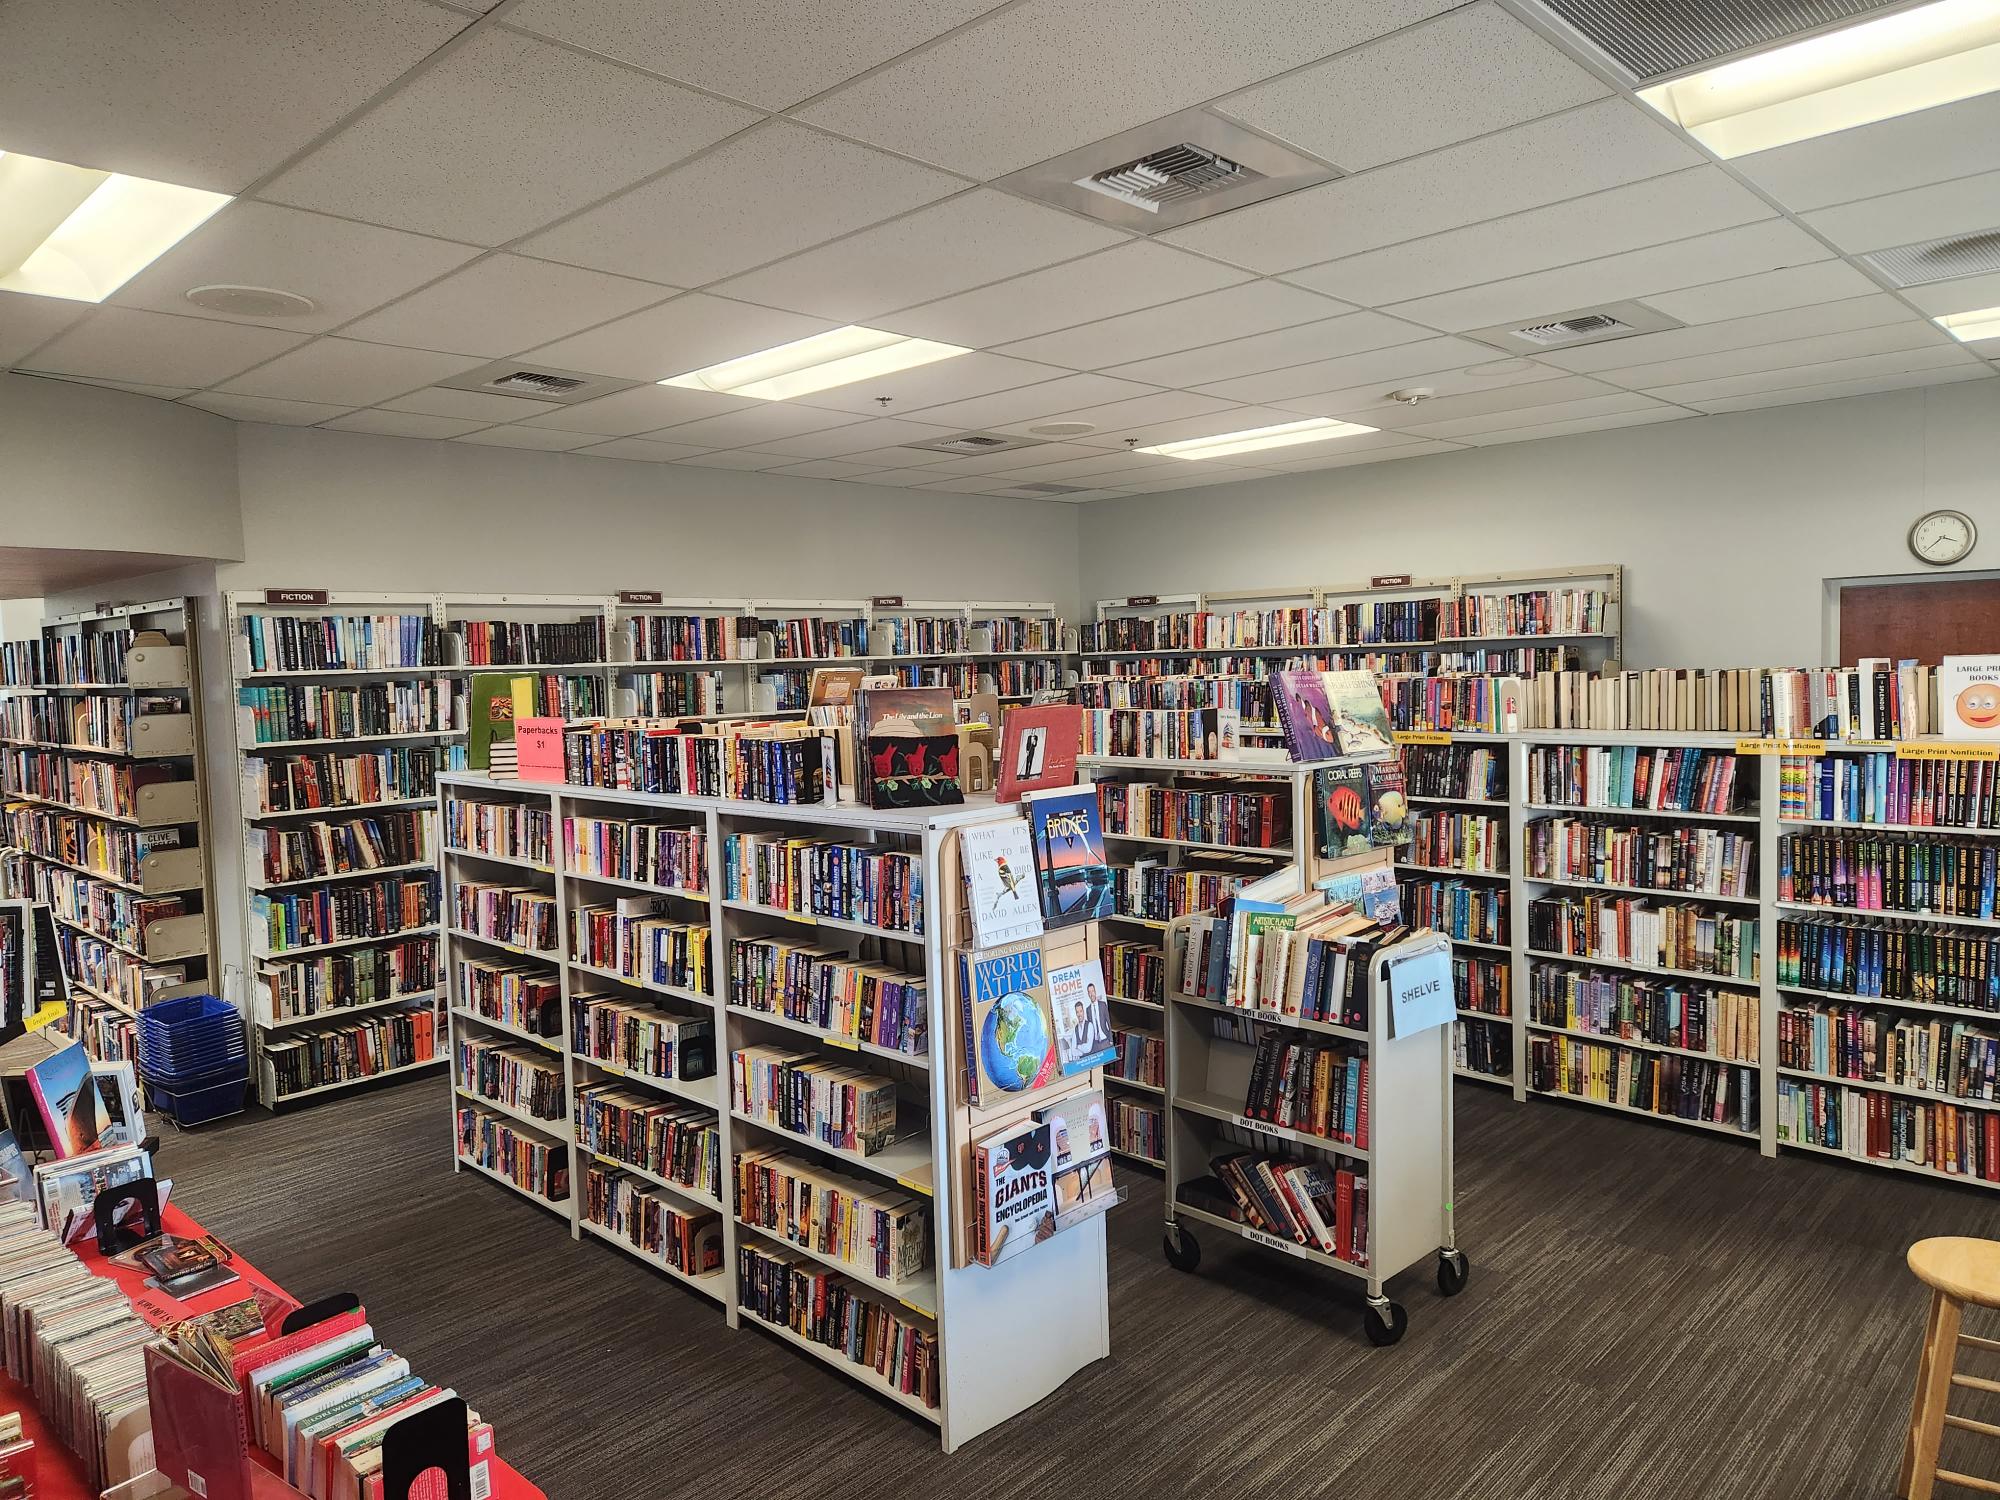 Chapter2Books is the largest bookstore in the North Valley, with amazing prices!